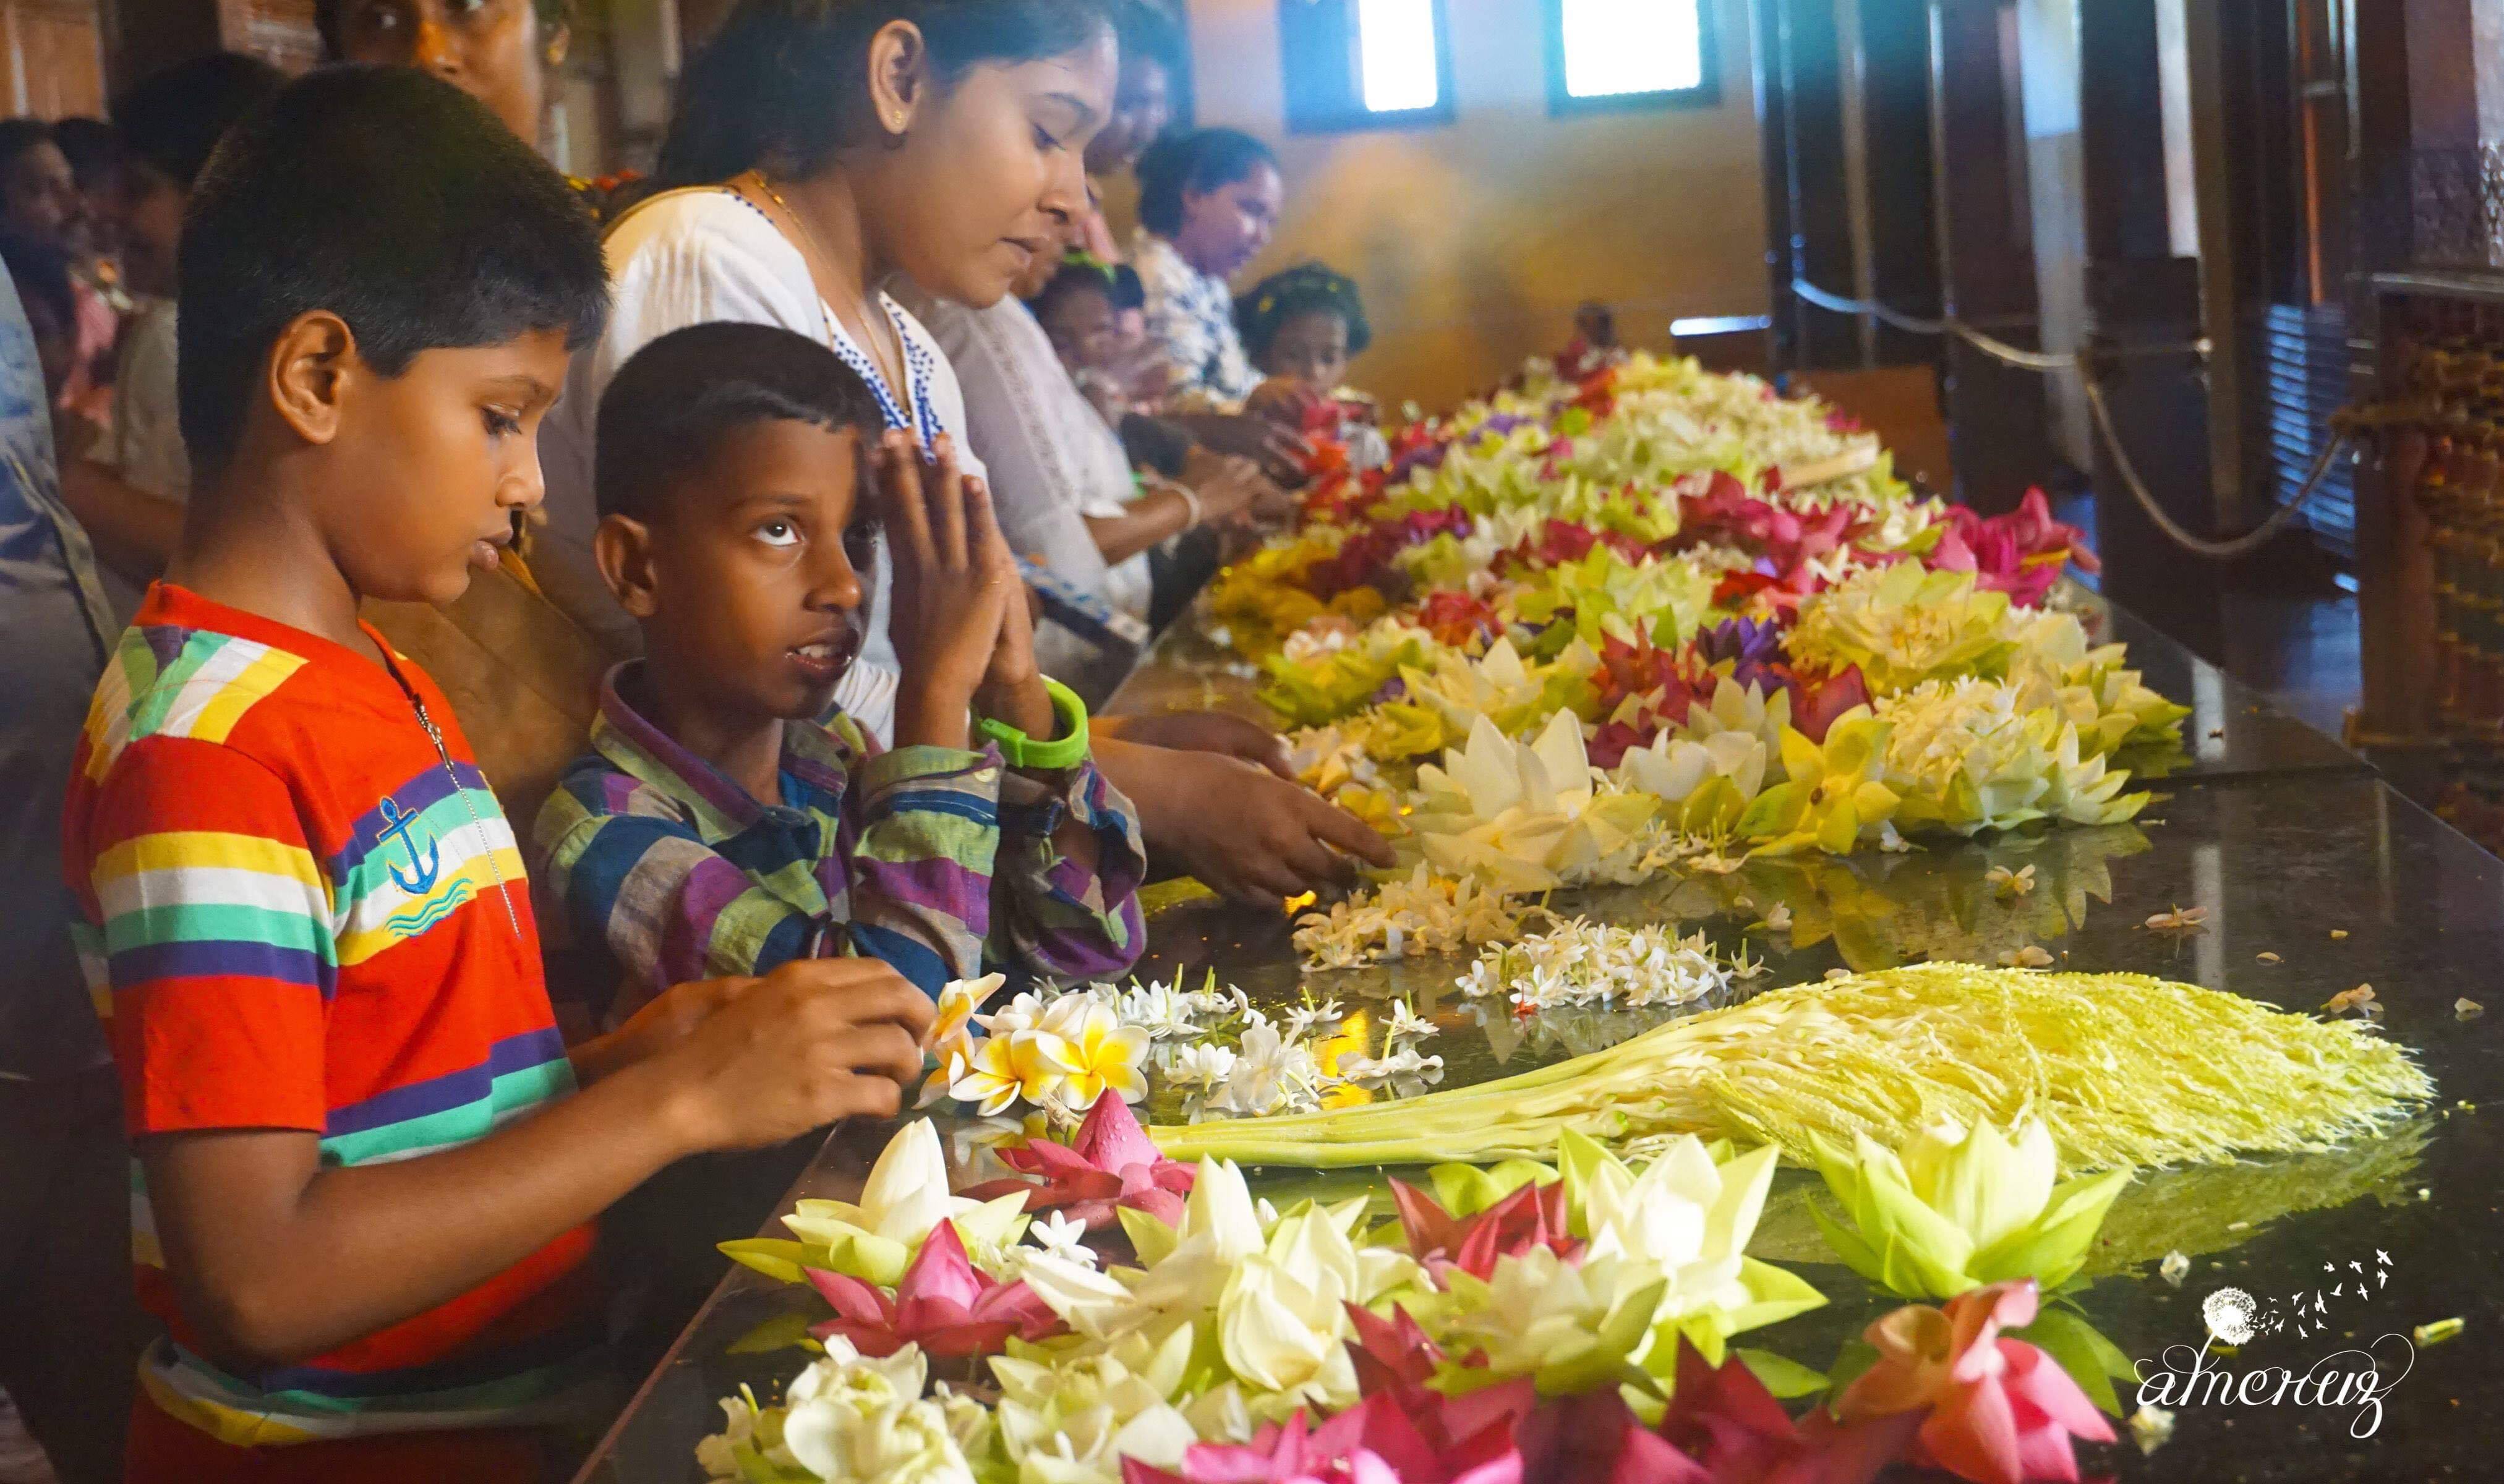 Sri Dalada Maligawa.  The home of the Temple of the Tooth Relic or “Sri Dalada Maligawa” is listed as a UNESCO World Heritage Site. People line up offering their flowers, prayers and meditating as well. Flowers like Jasmine are usually offered as it symbolizes love and devotion.